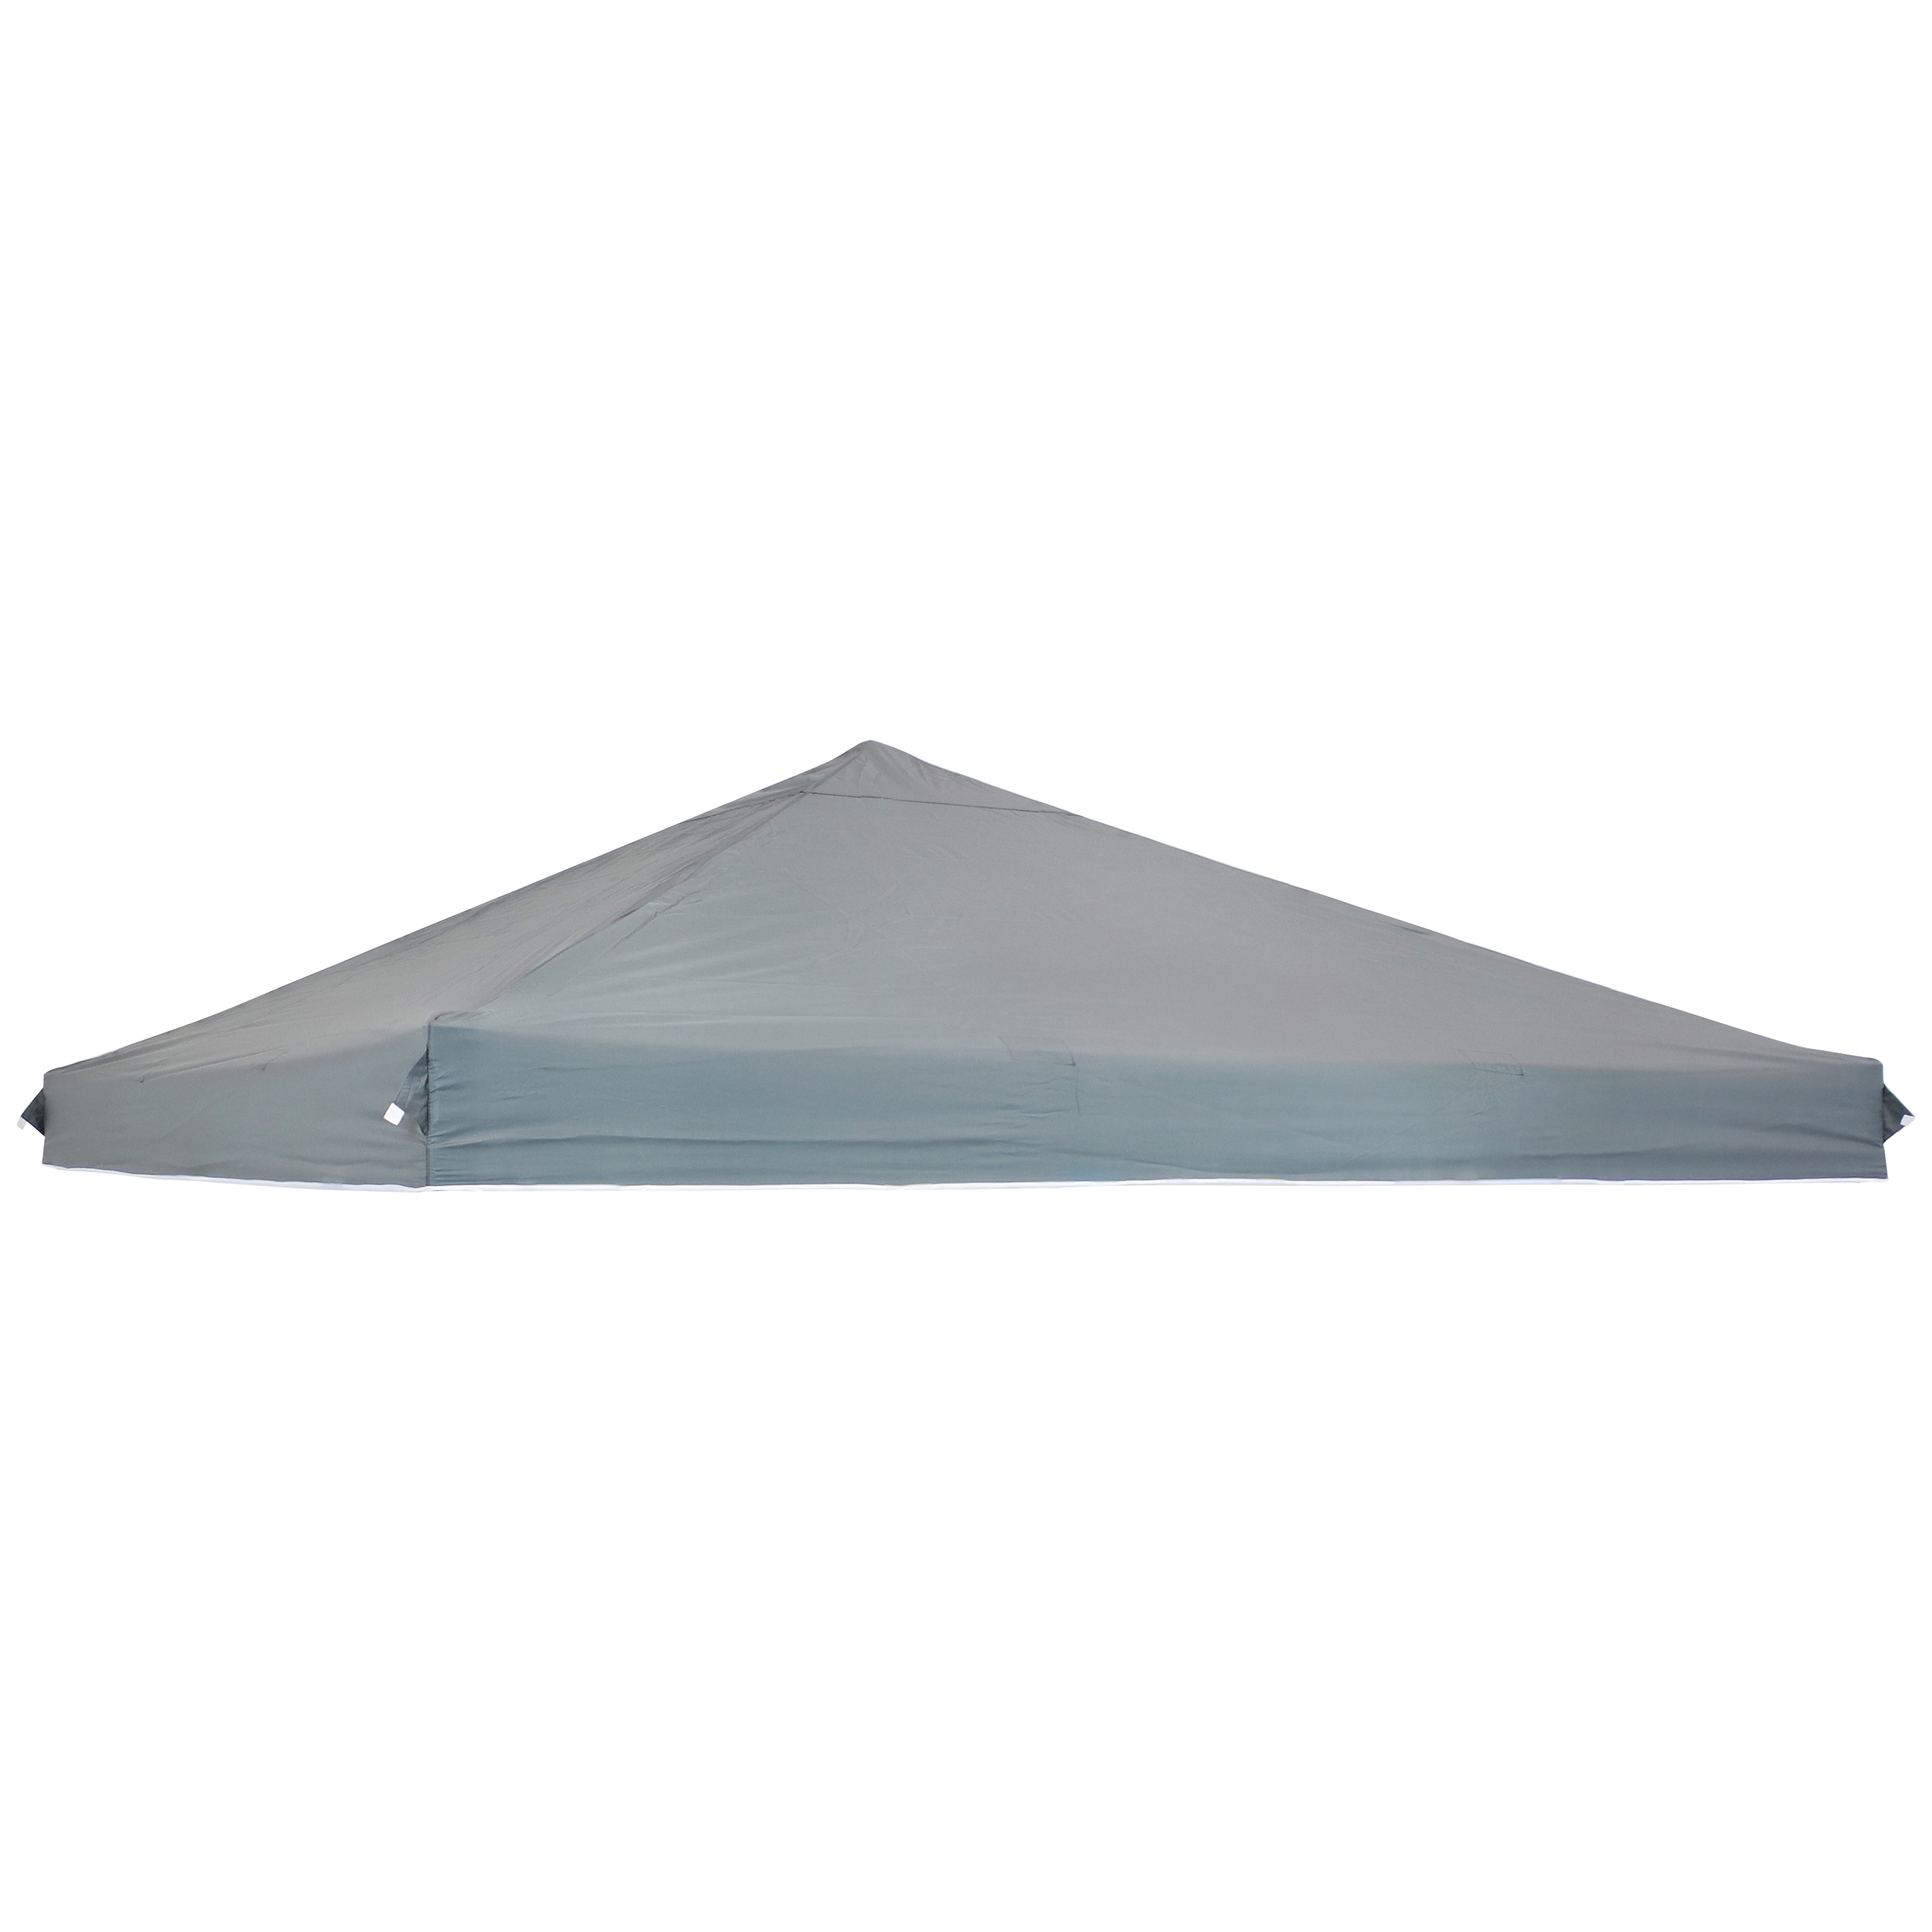 10 x 10 ft Standard Oxford Fabric Pop-Up Canopy Shade - Gray